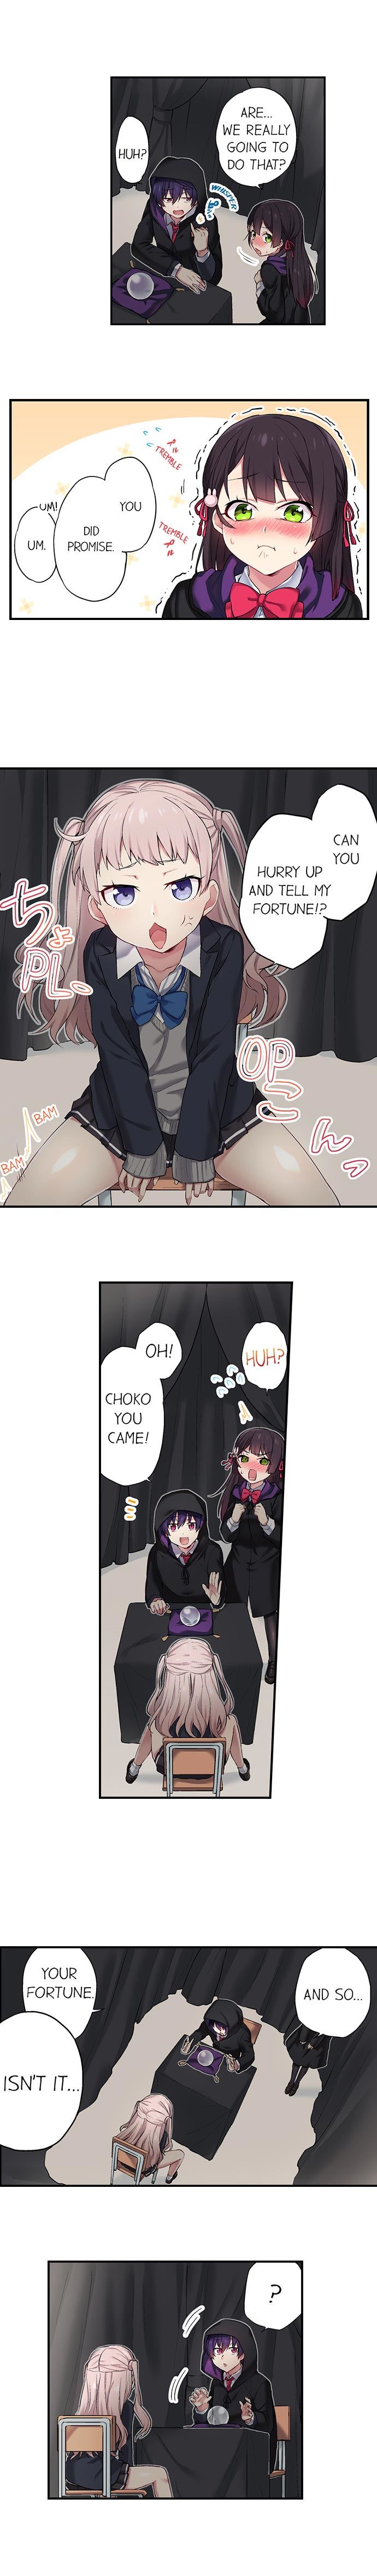 Committee Chairman, Didn't You Just Masturbate In the Bathroom? I Can See the Number of Times People Orgasm (Colored) Ch.10